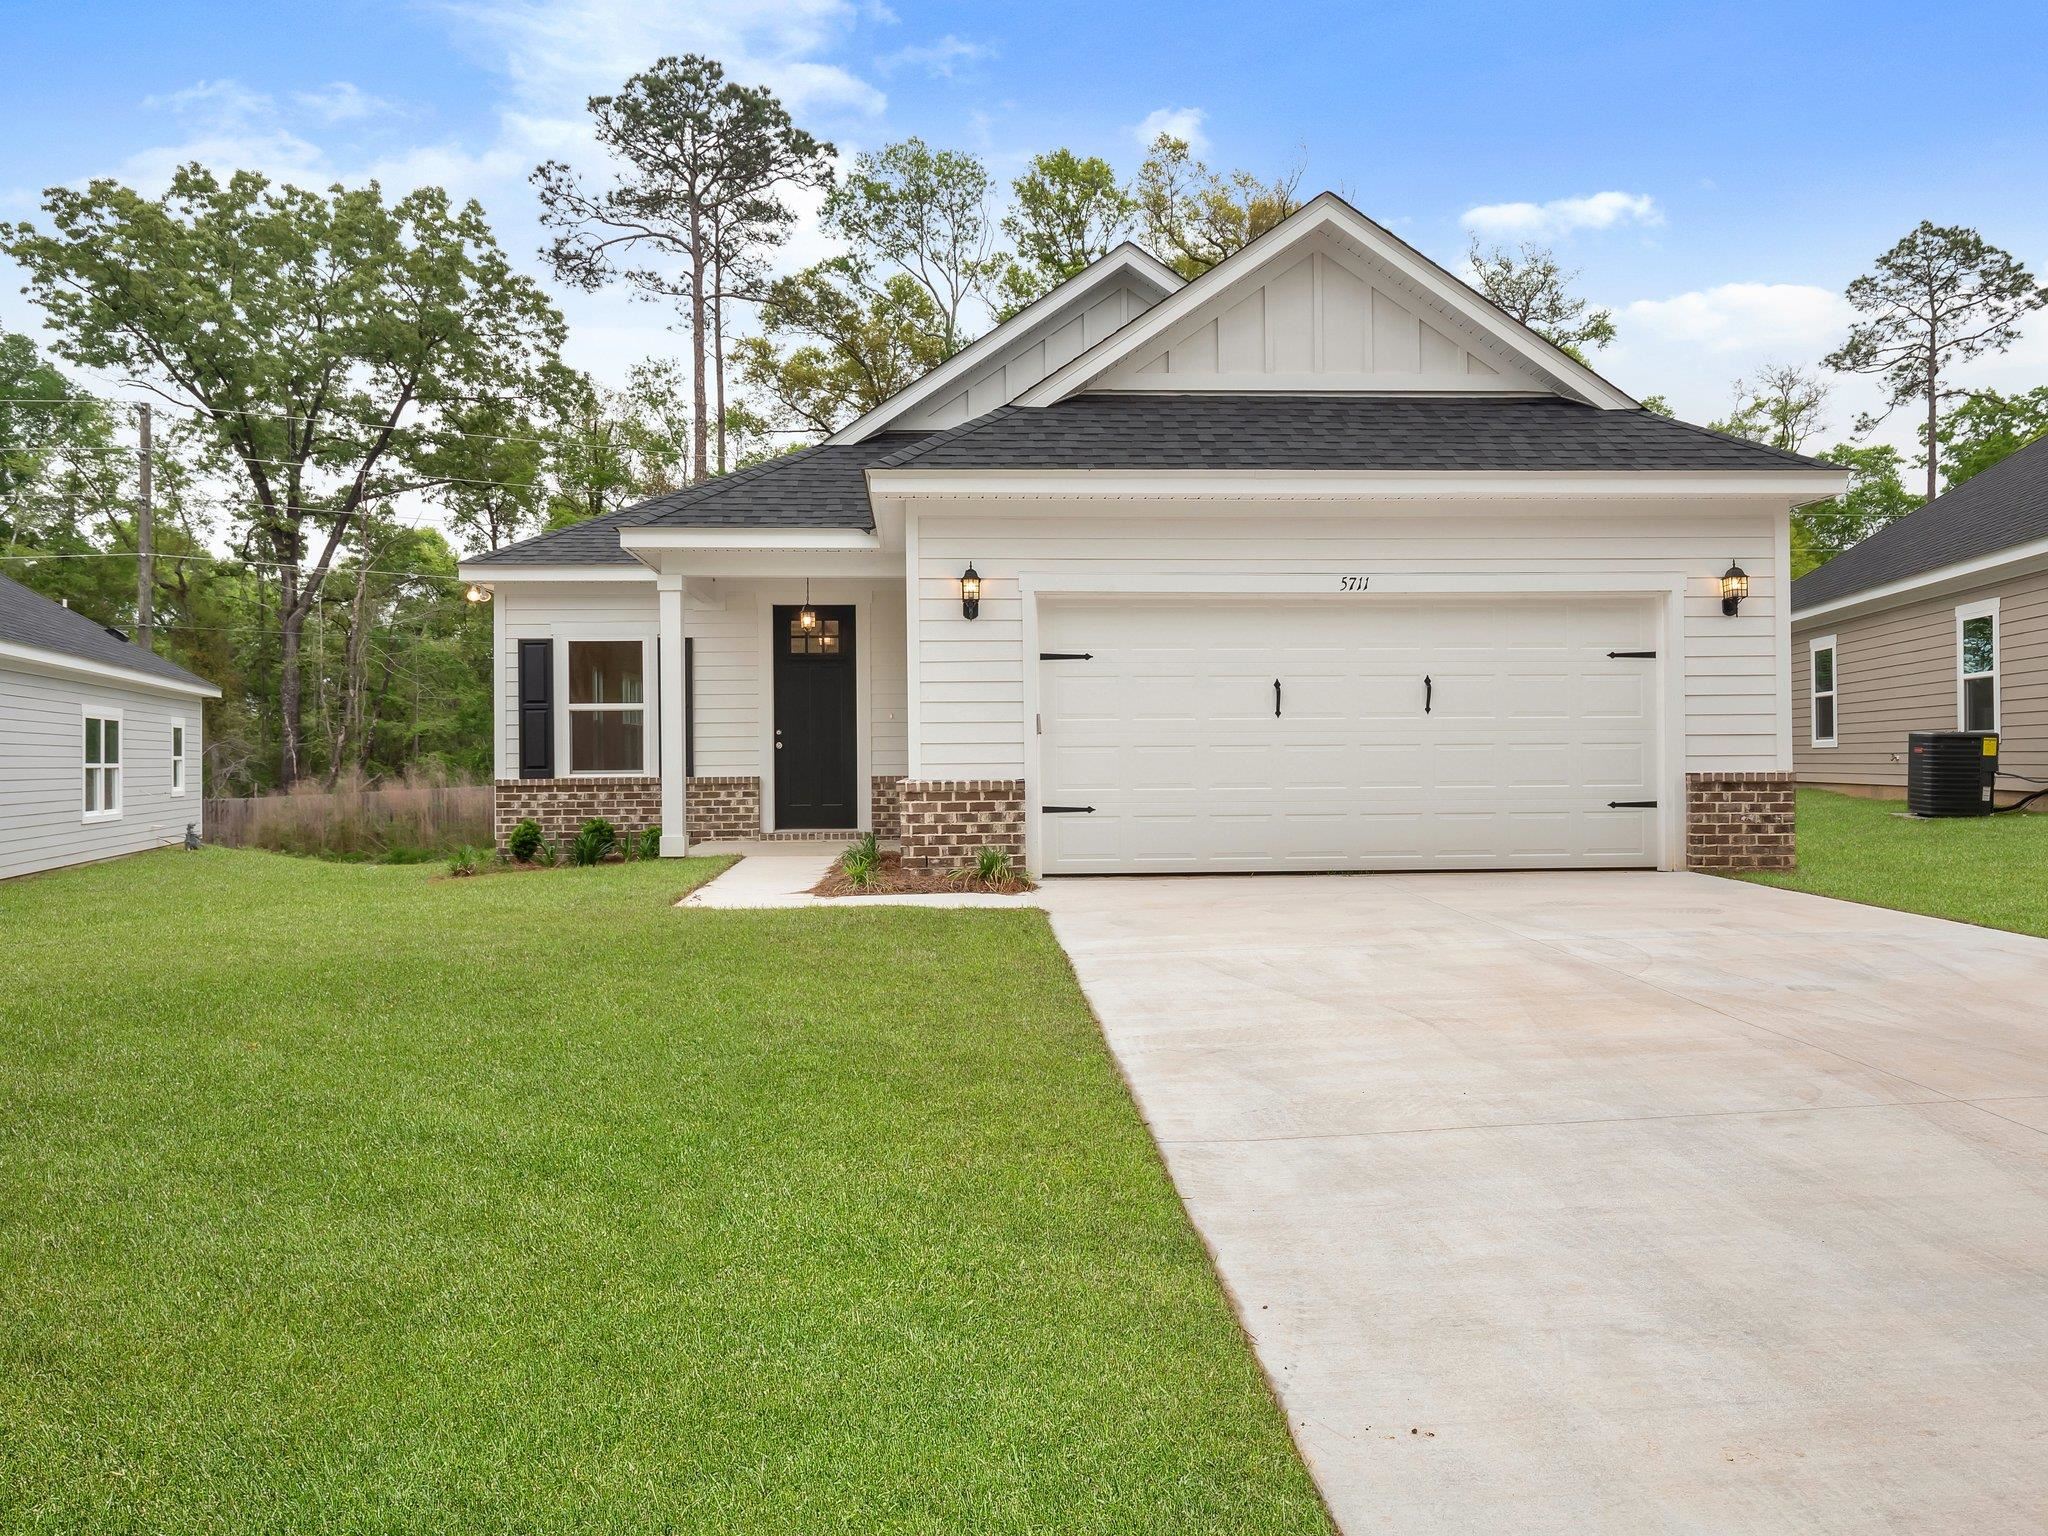 5404 River Reserve Lane,TALLAHASSEE,Florida 32303,3 Bedrooms Bedrooms,2 BathroomsBathrooms,Detached single family,5404 River Reserve Lane,365537